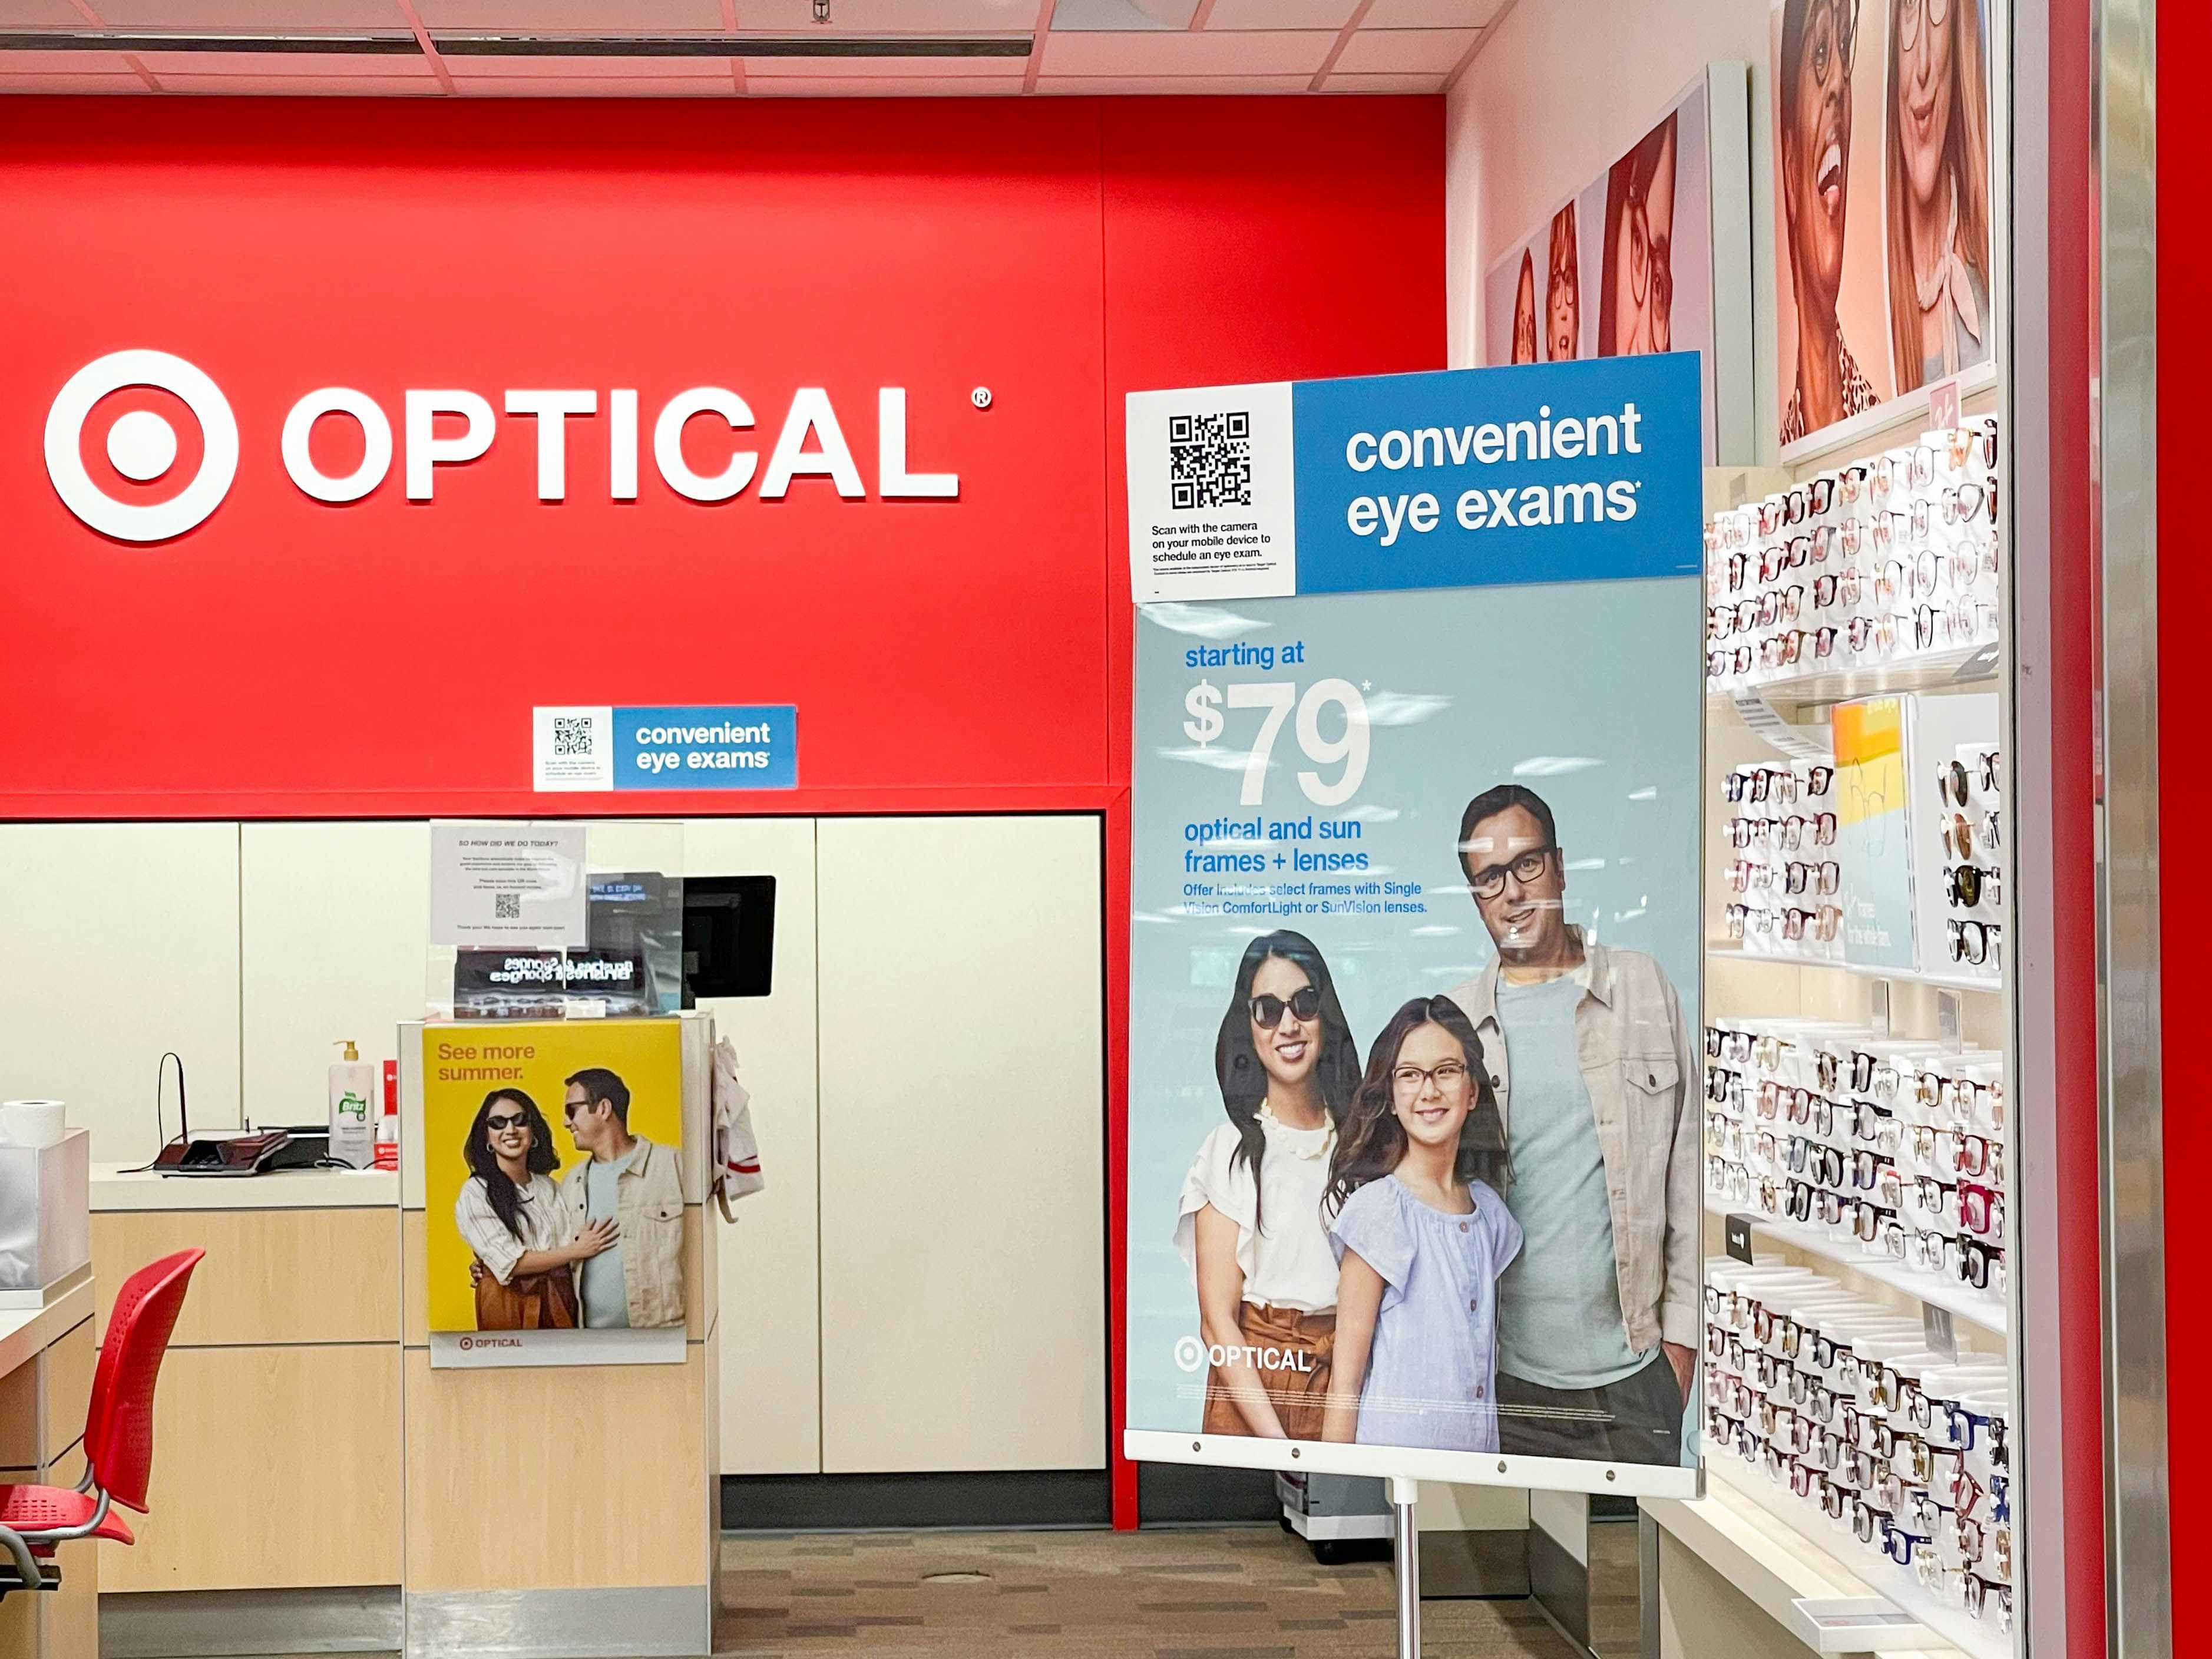 The Target optical section in-store with a sign advertising for convenient eye exams.